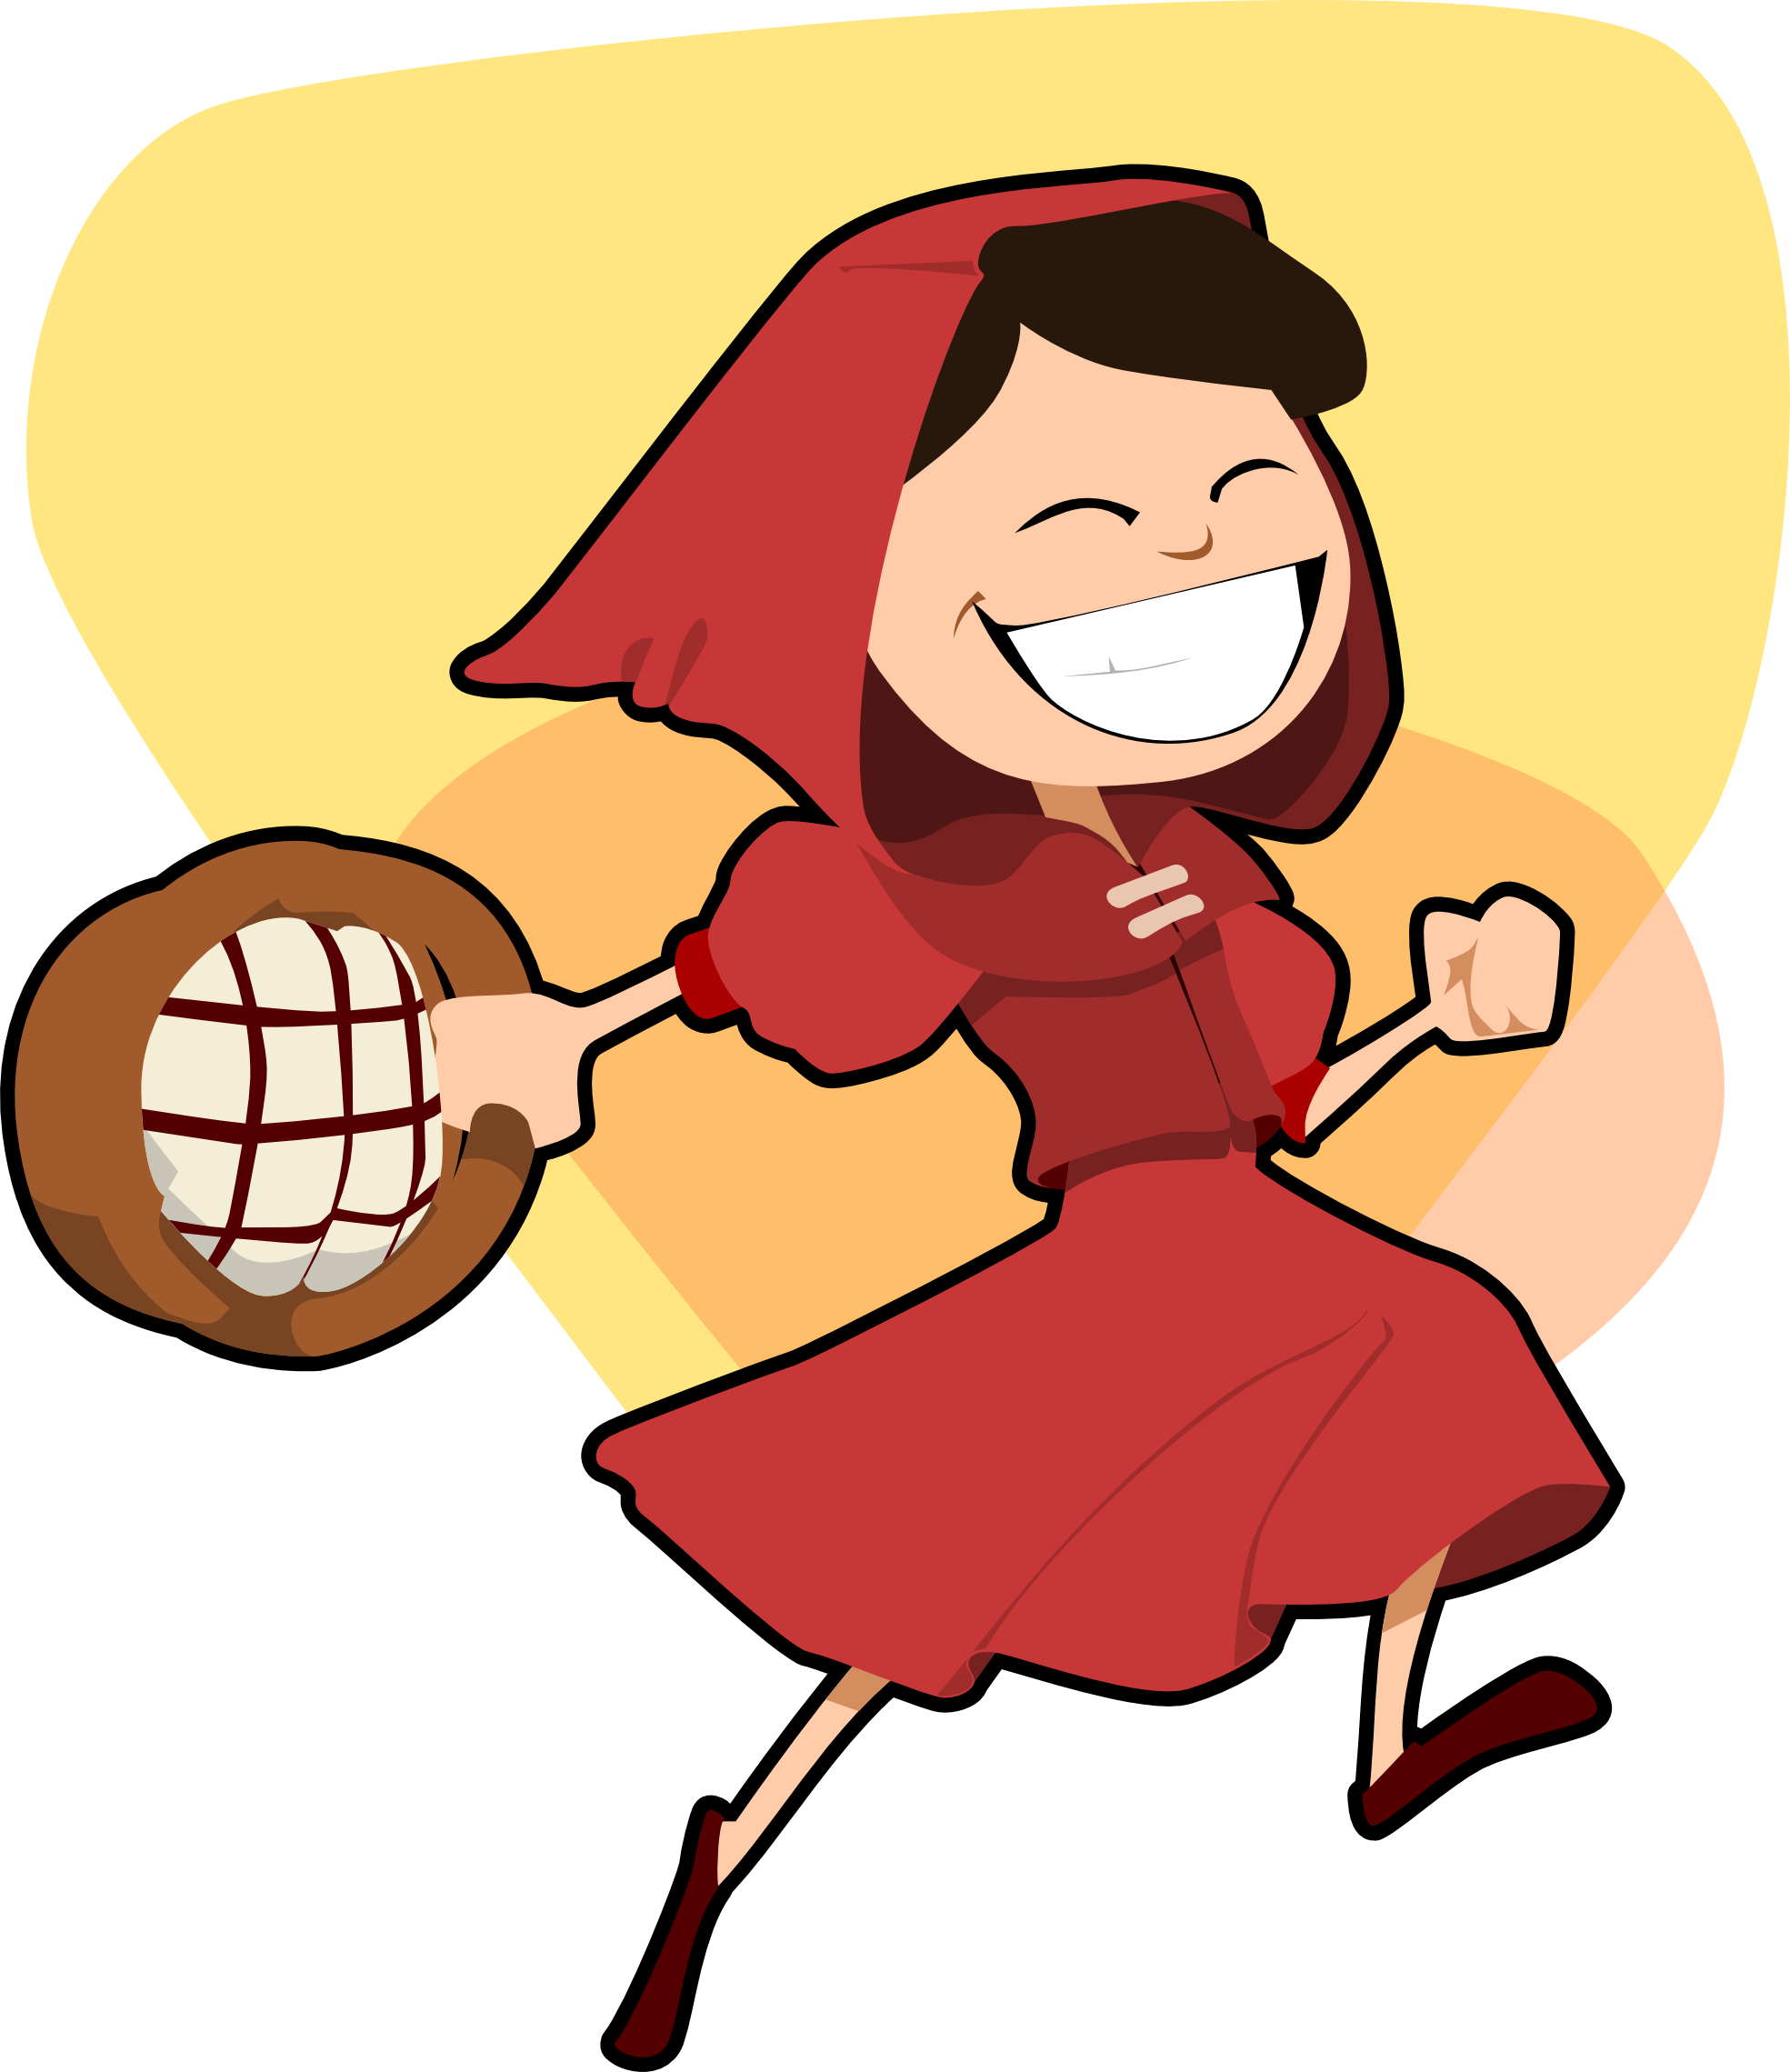 little red riding hood scalable vector graphics - Clipart library